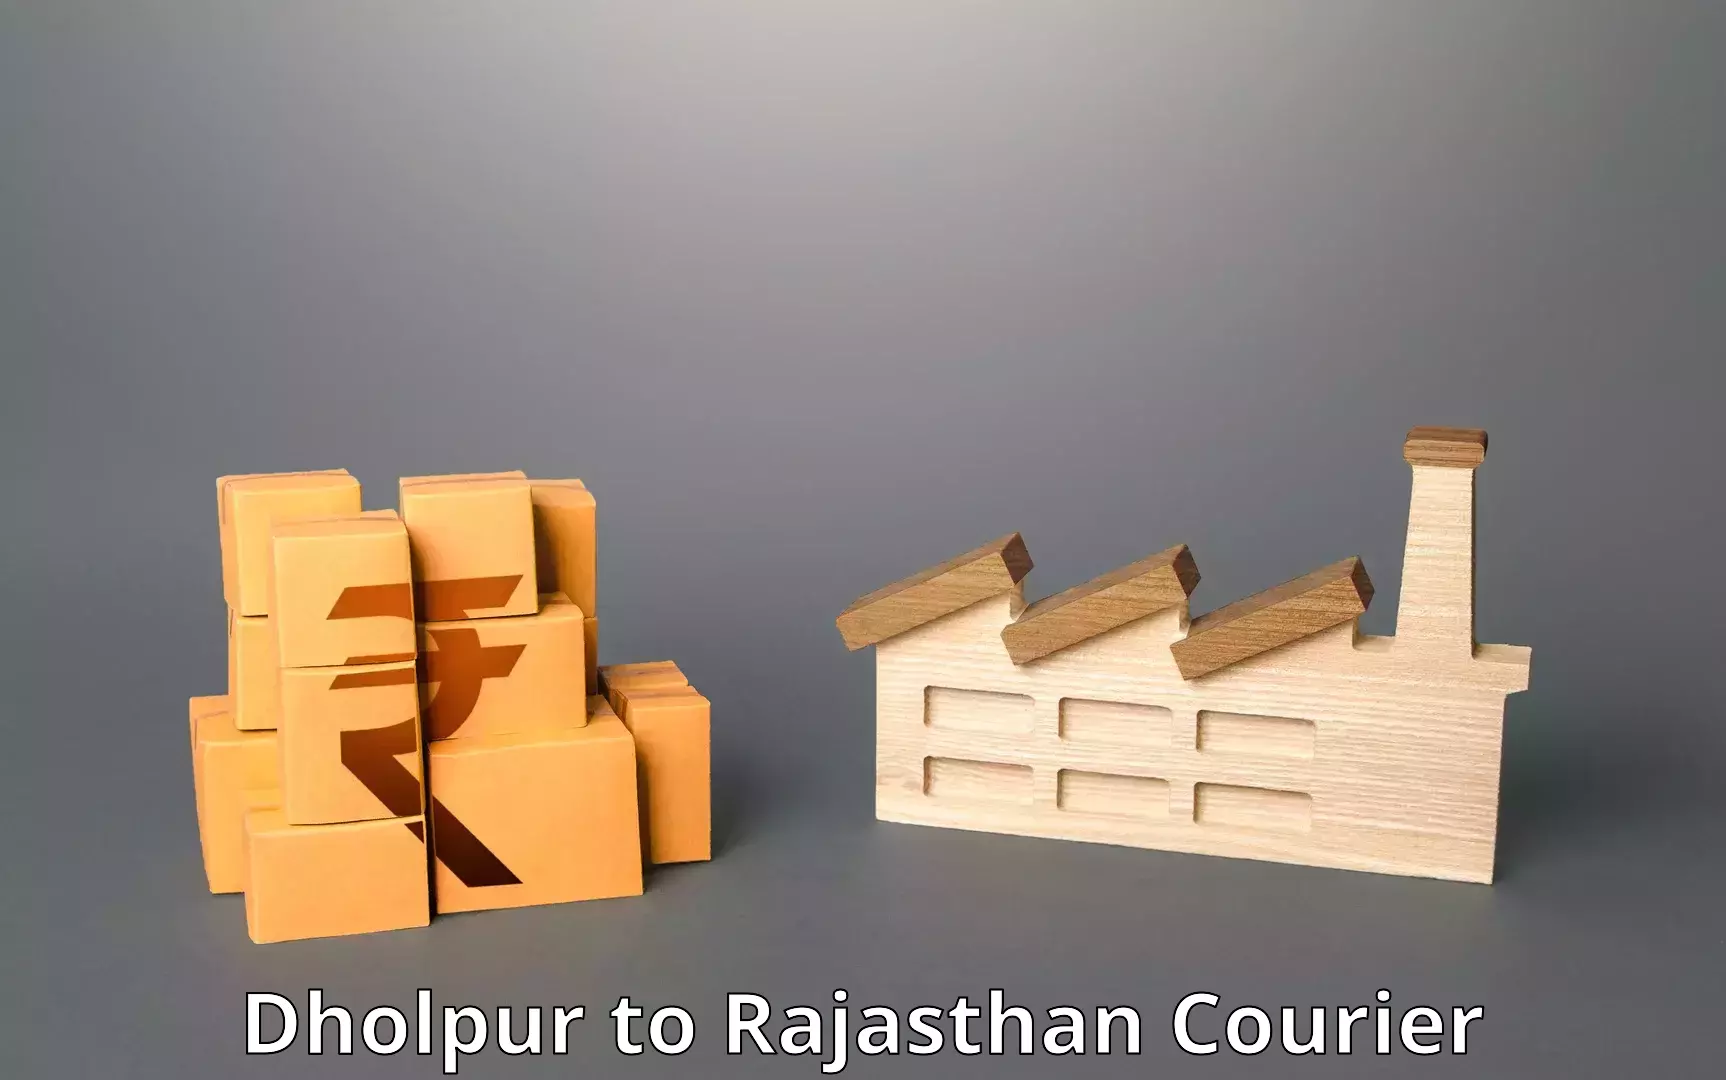 Package delivery network Dholpur to Rajasthan